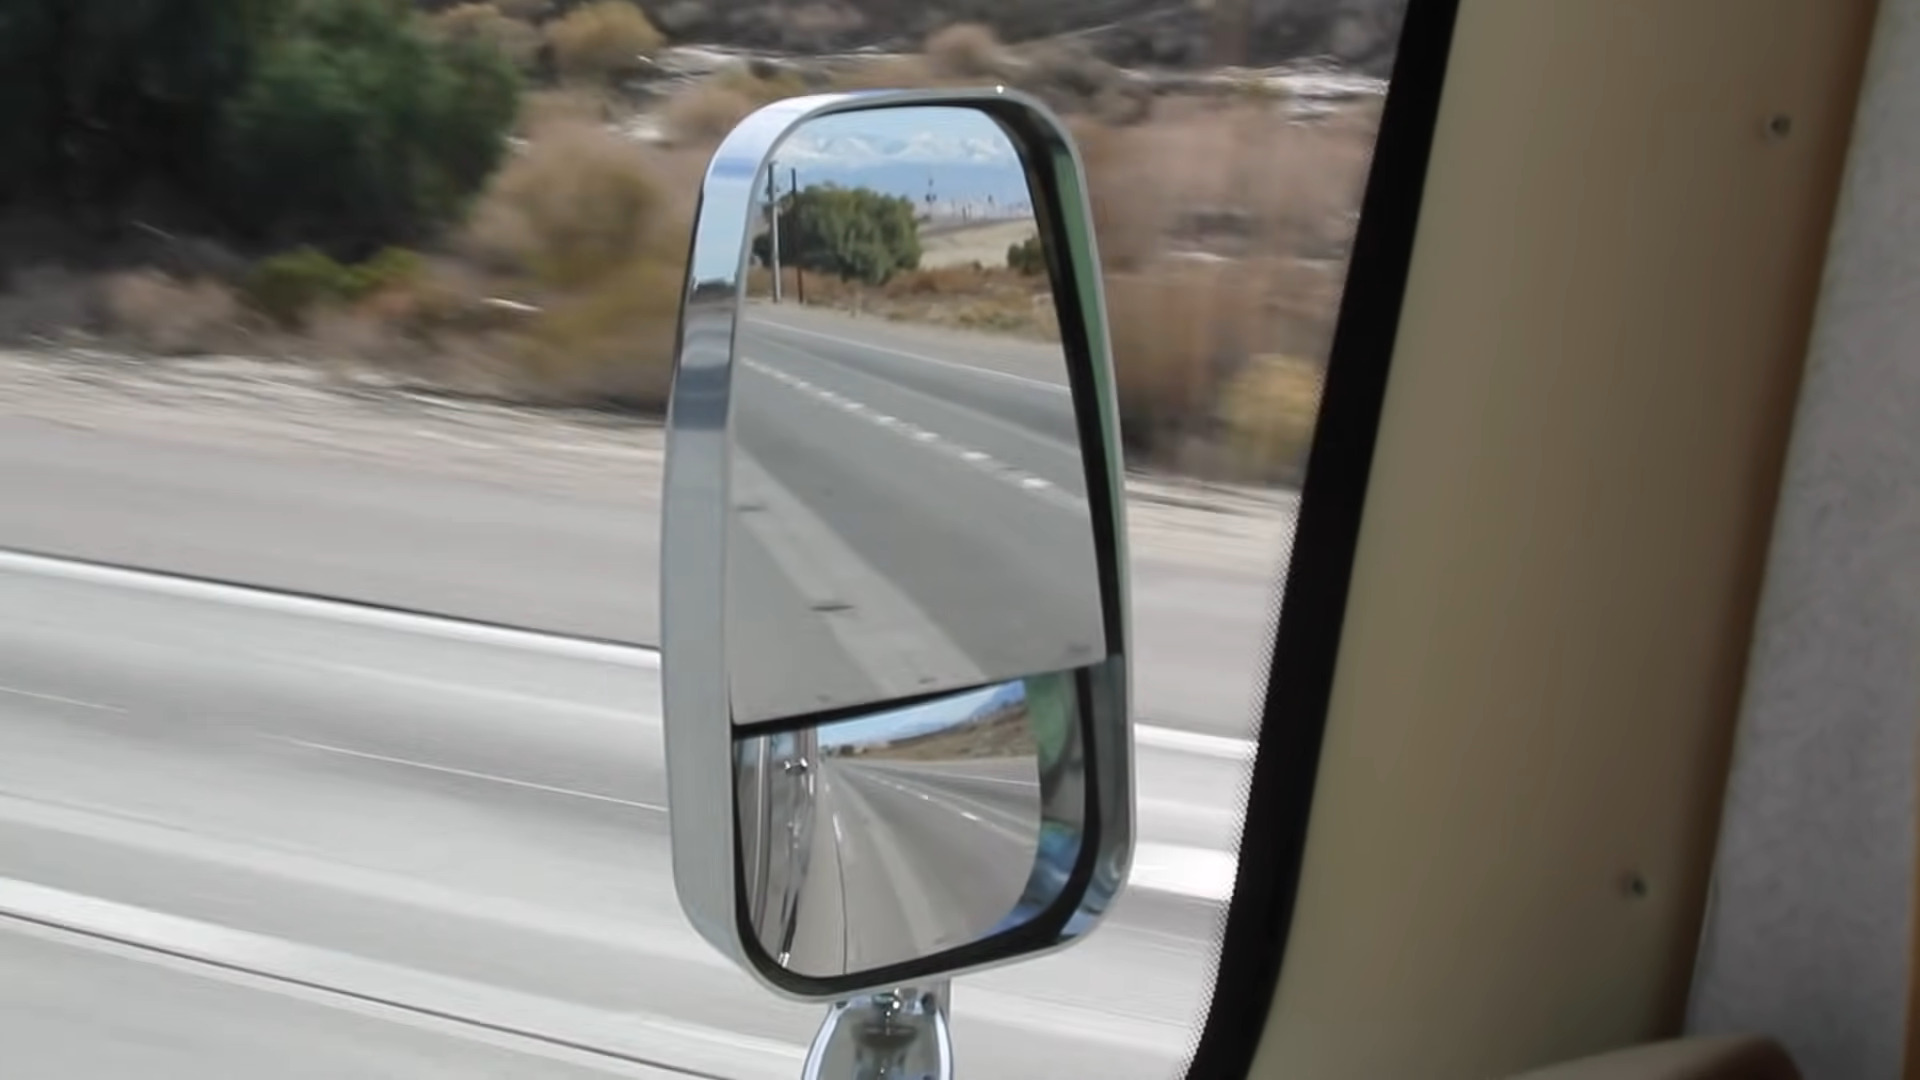 RV mirror adjusted too far out, opening up a dangerous blind spot.